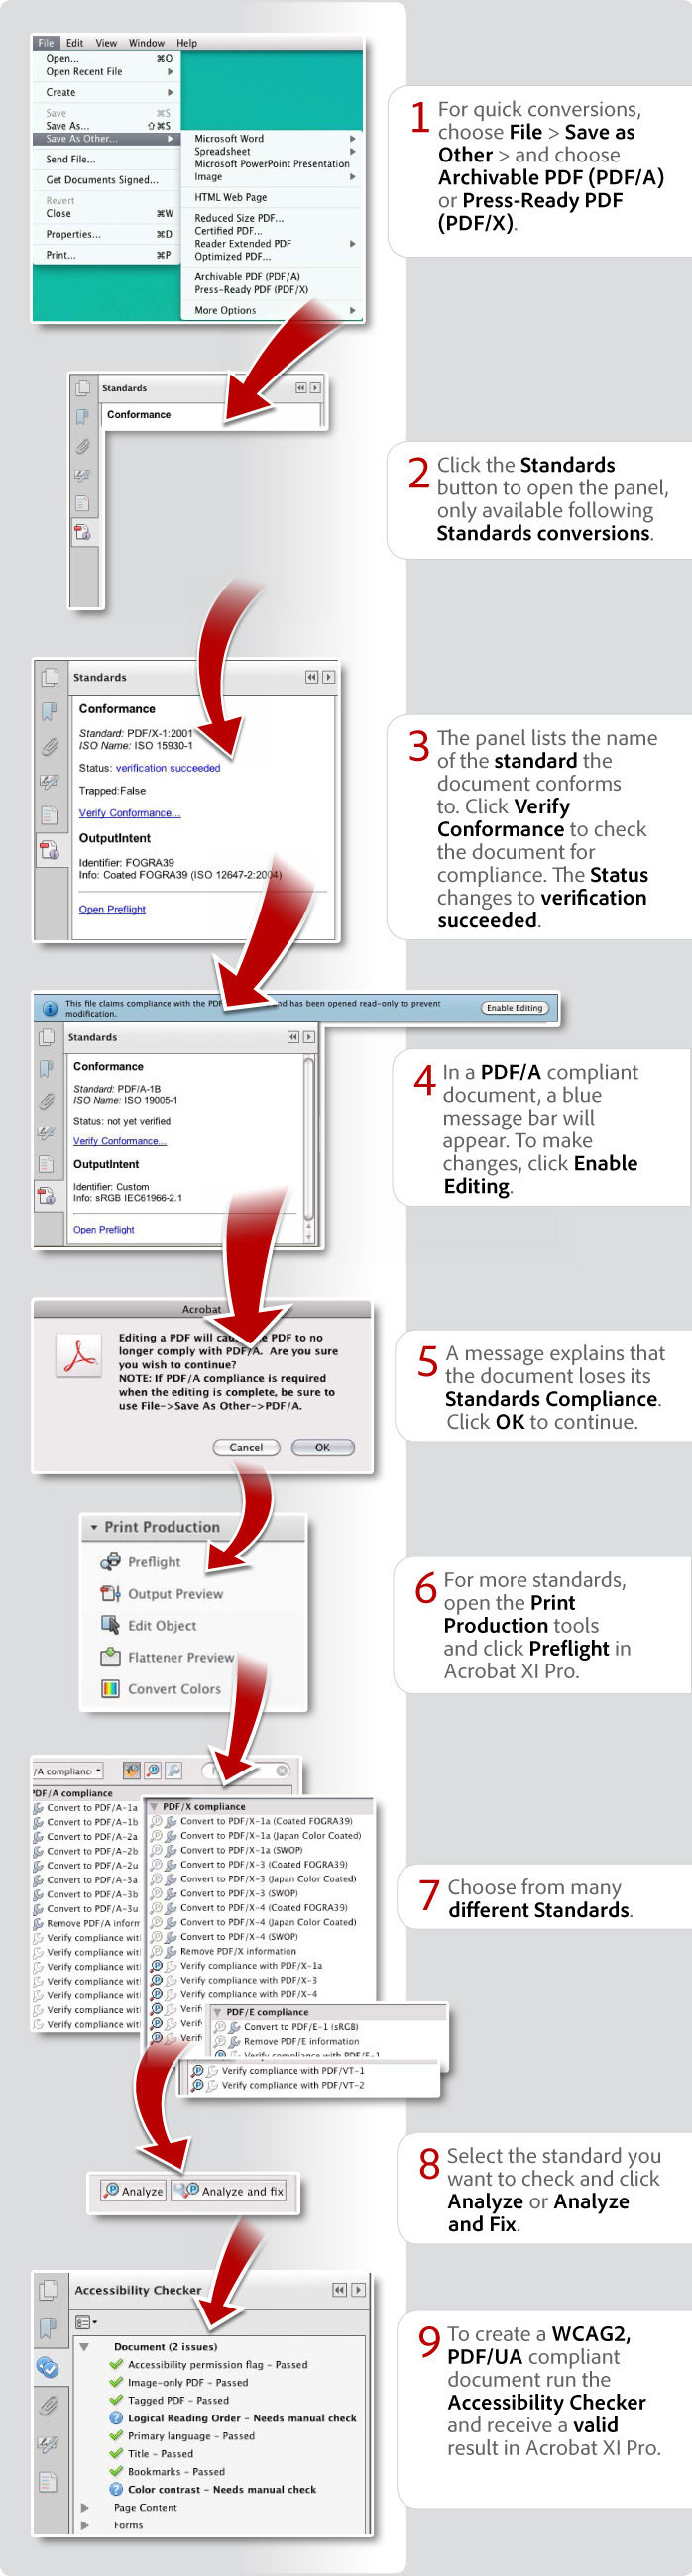 How to conform to PDF standards using Acrobat XI